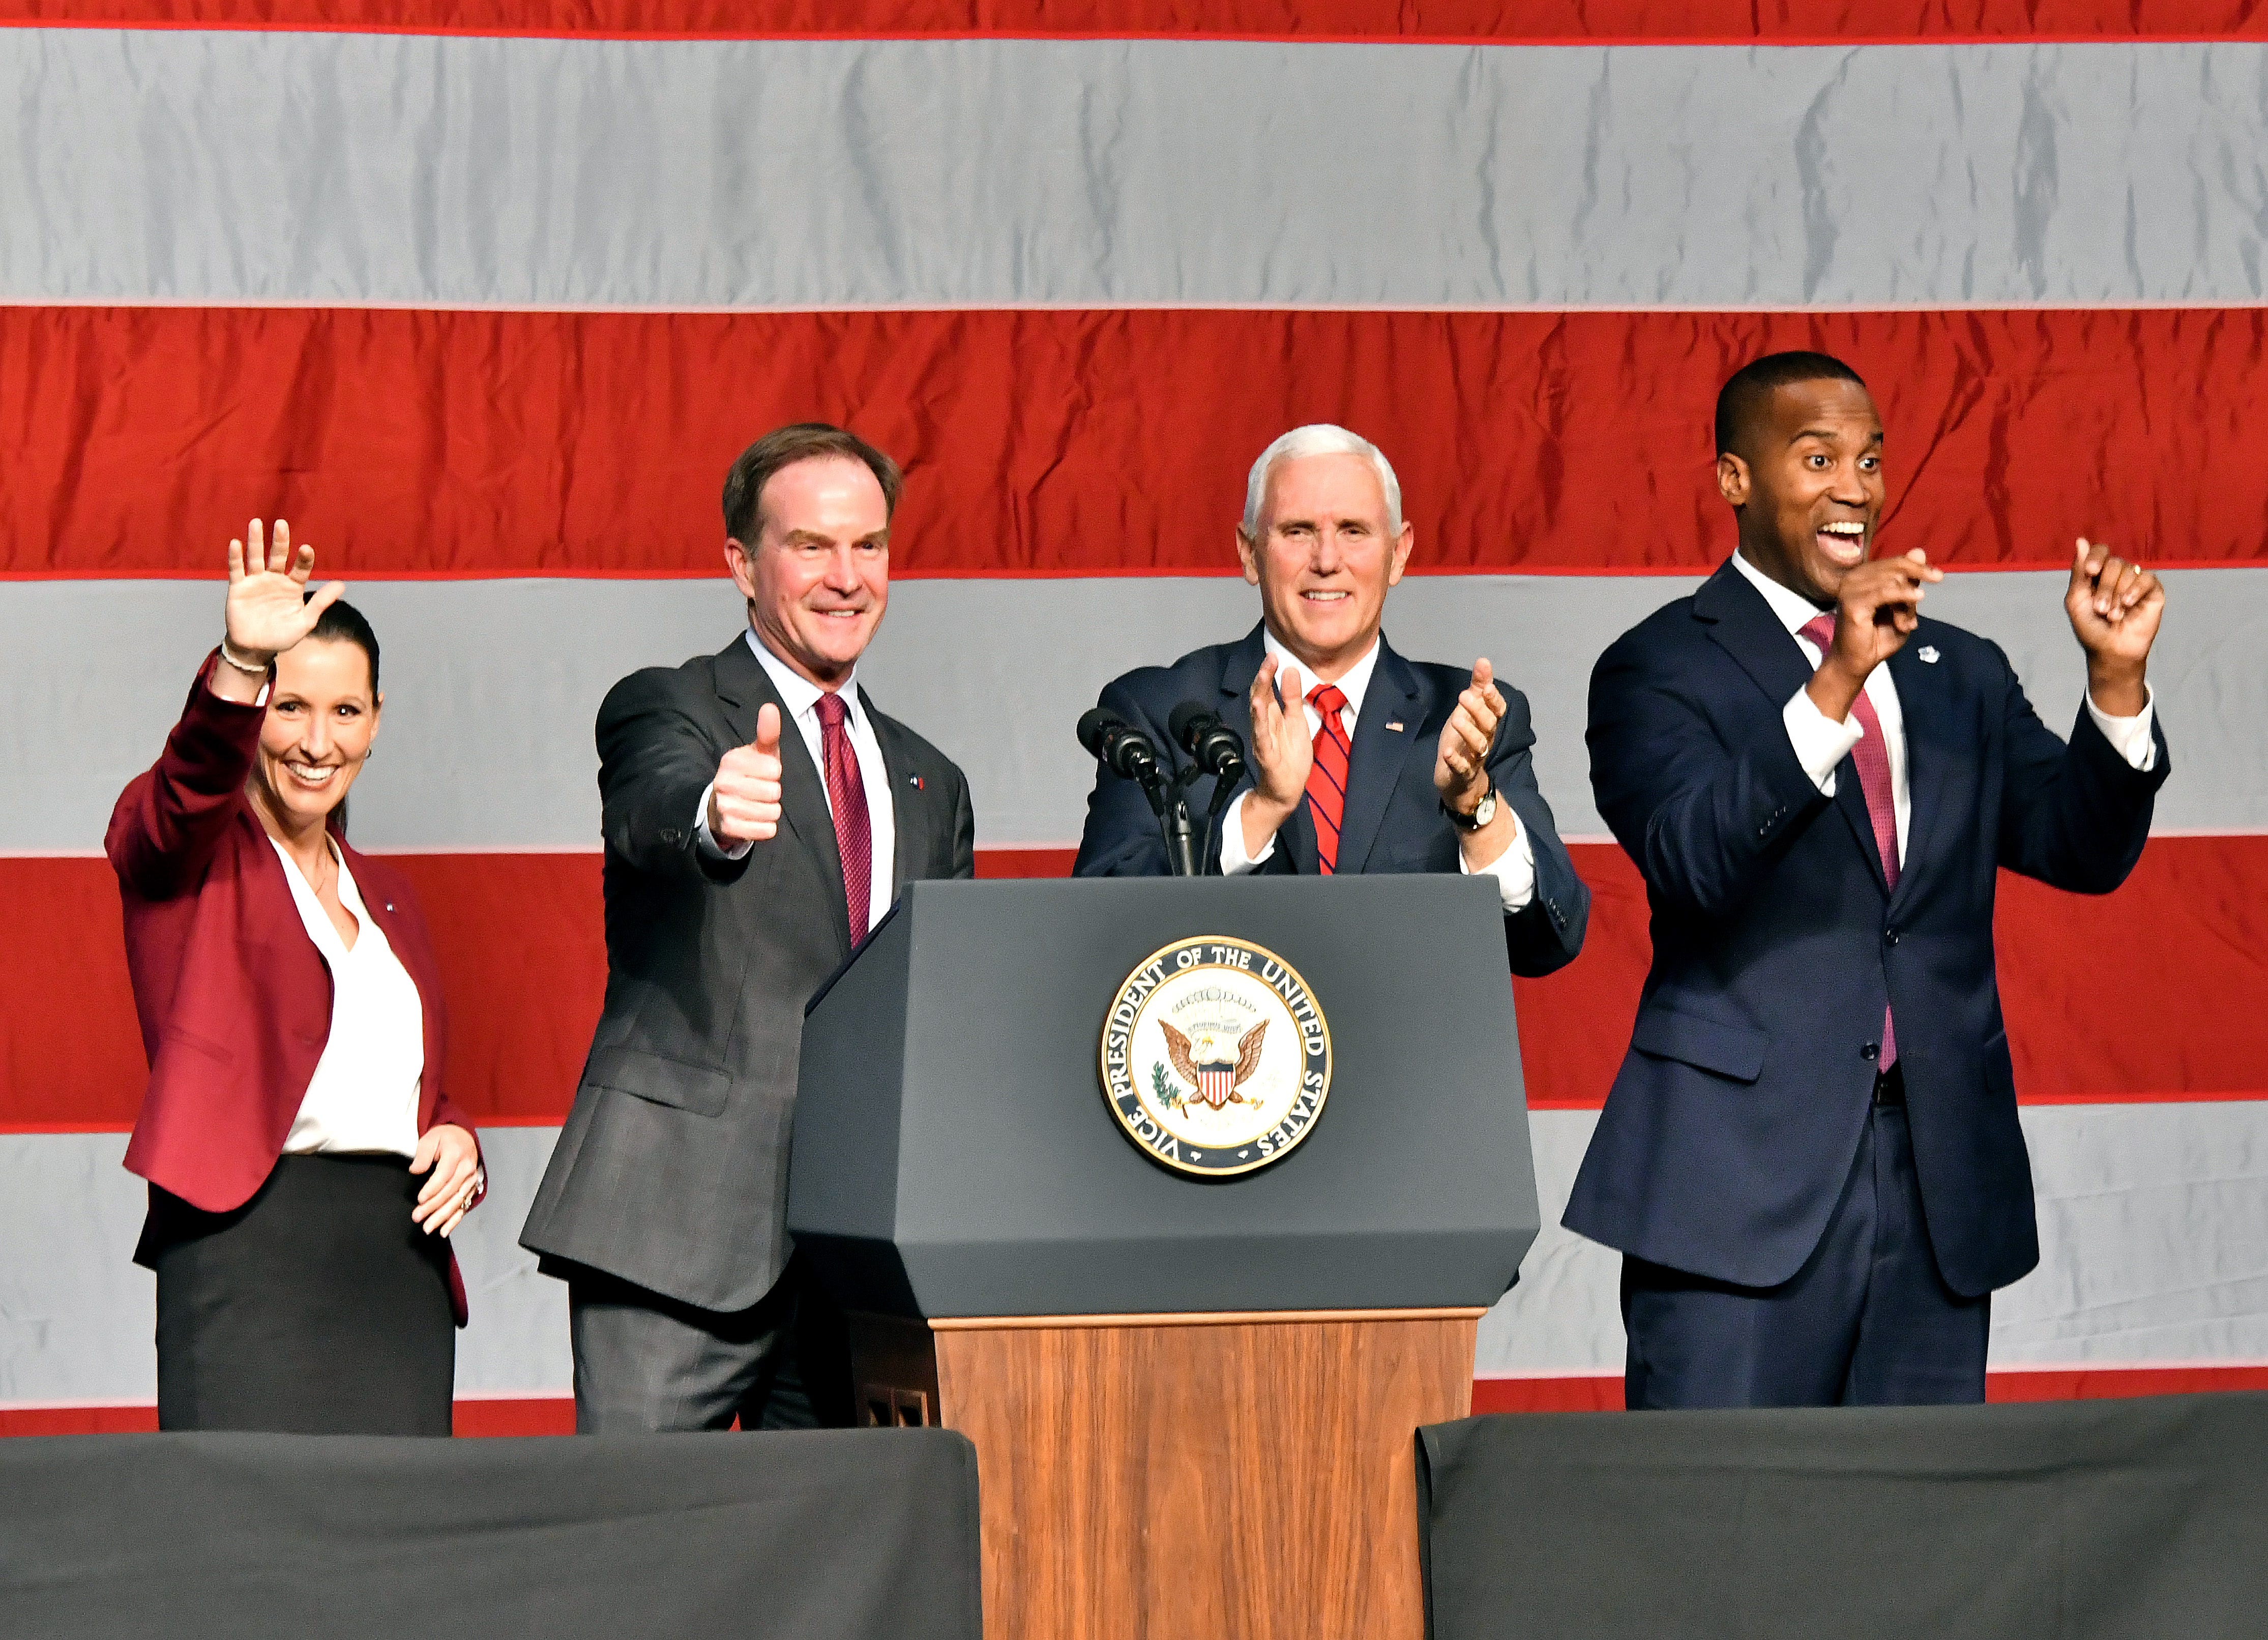 Laura Posthumus Lyons, Bill Schuette, Vice President Mike Pence and John James wave at the crowd as the V.P. campaigns with Republican candidates at the DeltaPlex in Grand Rapids on Monday, Oct 29, 2018.